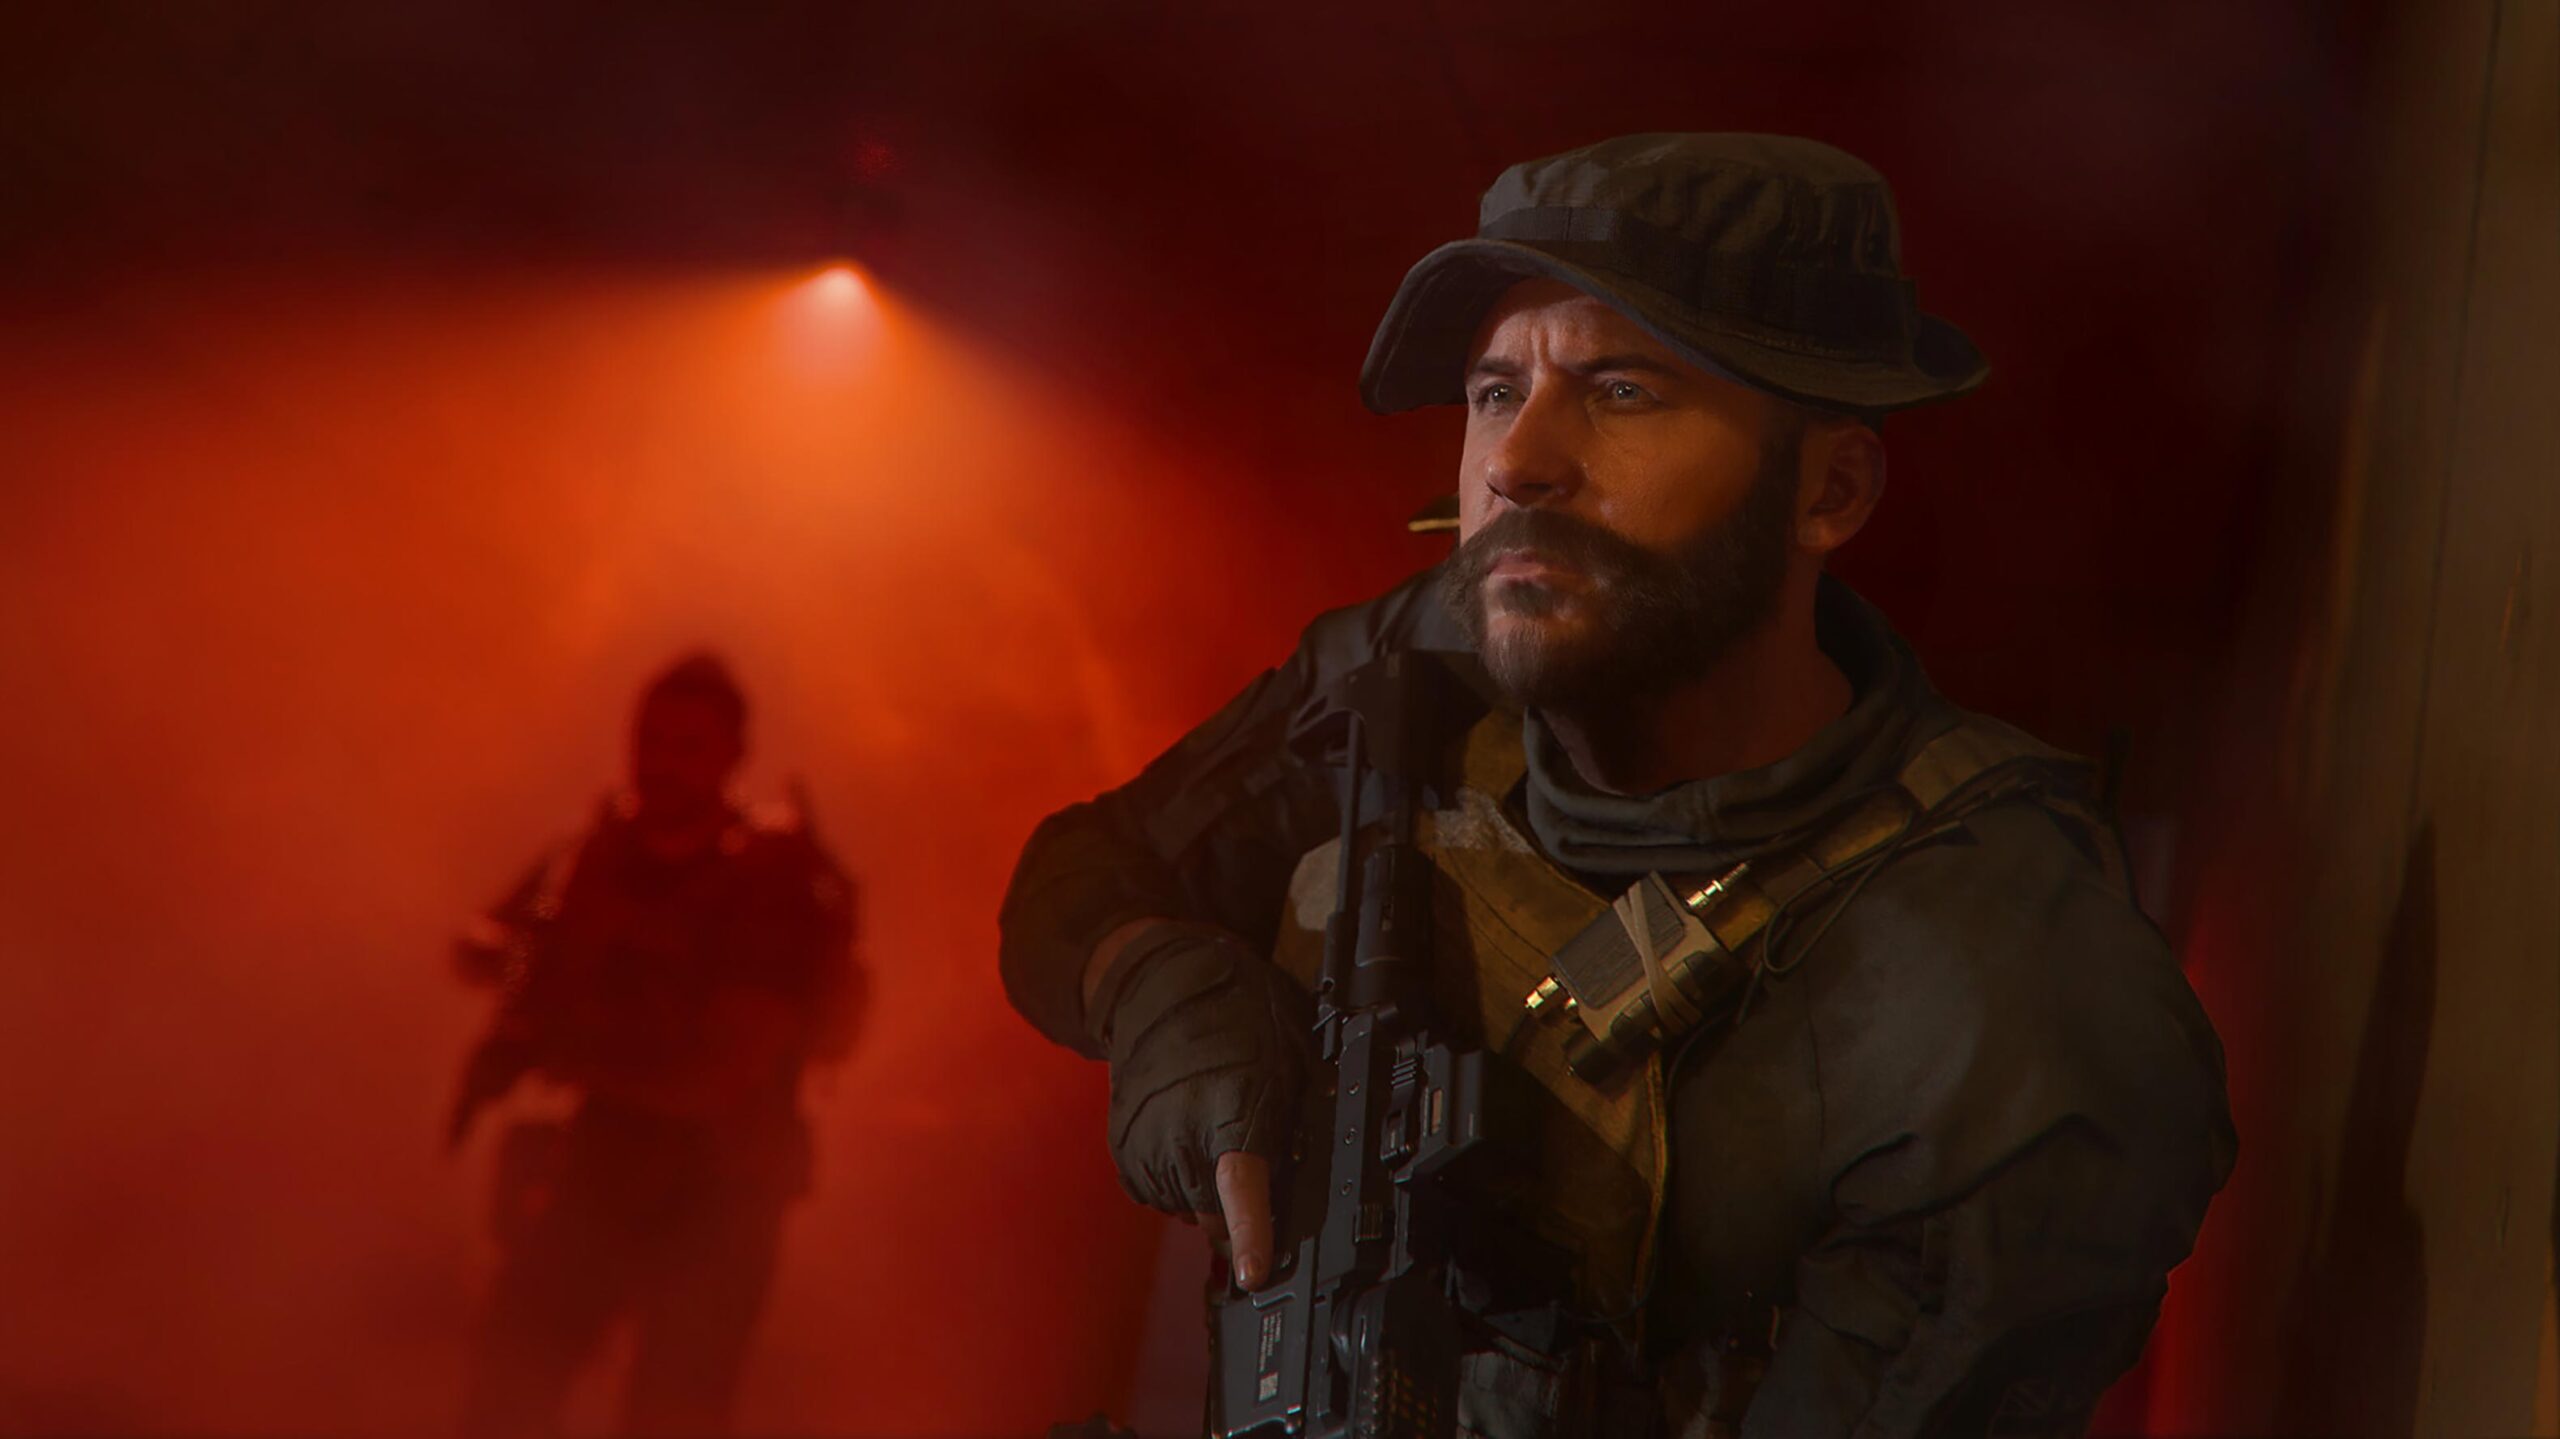 Xbox boss says Call of Duty will have full parity ‘across all platforms’